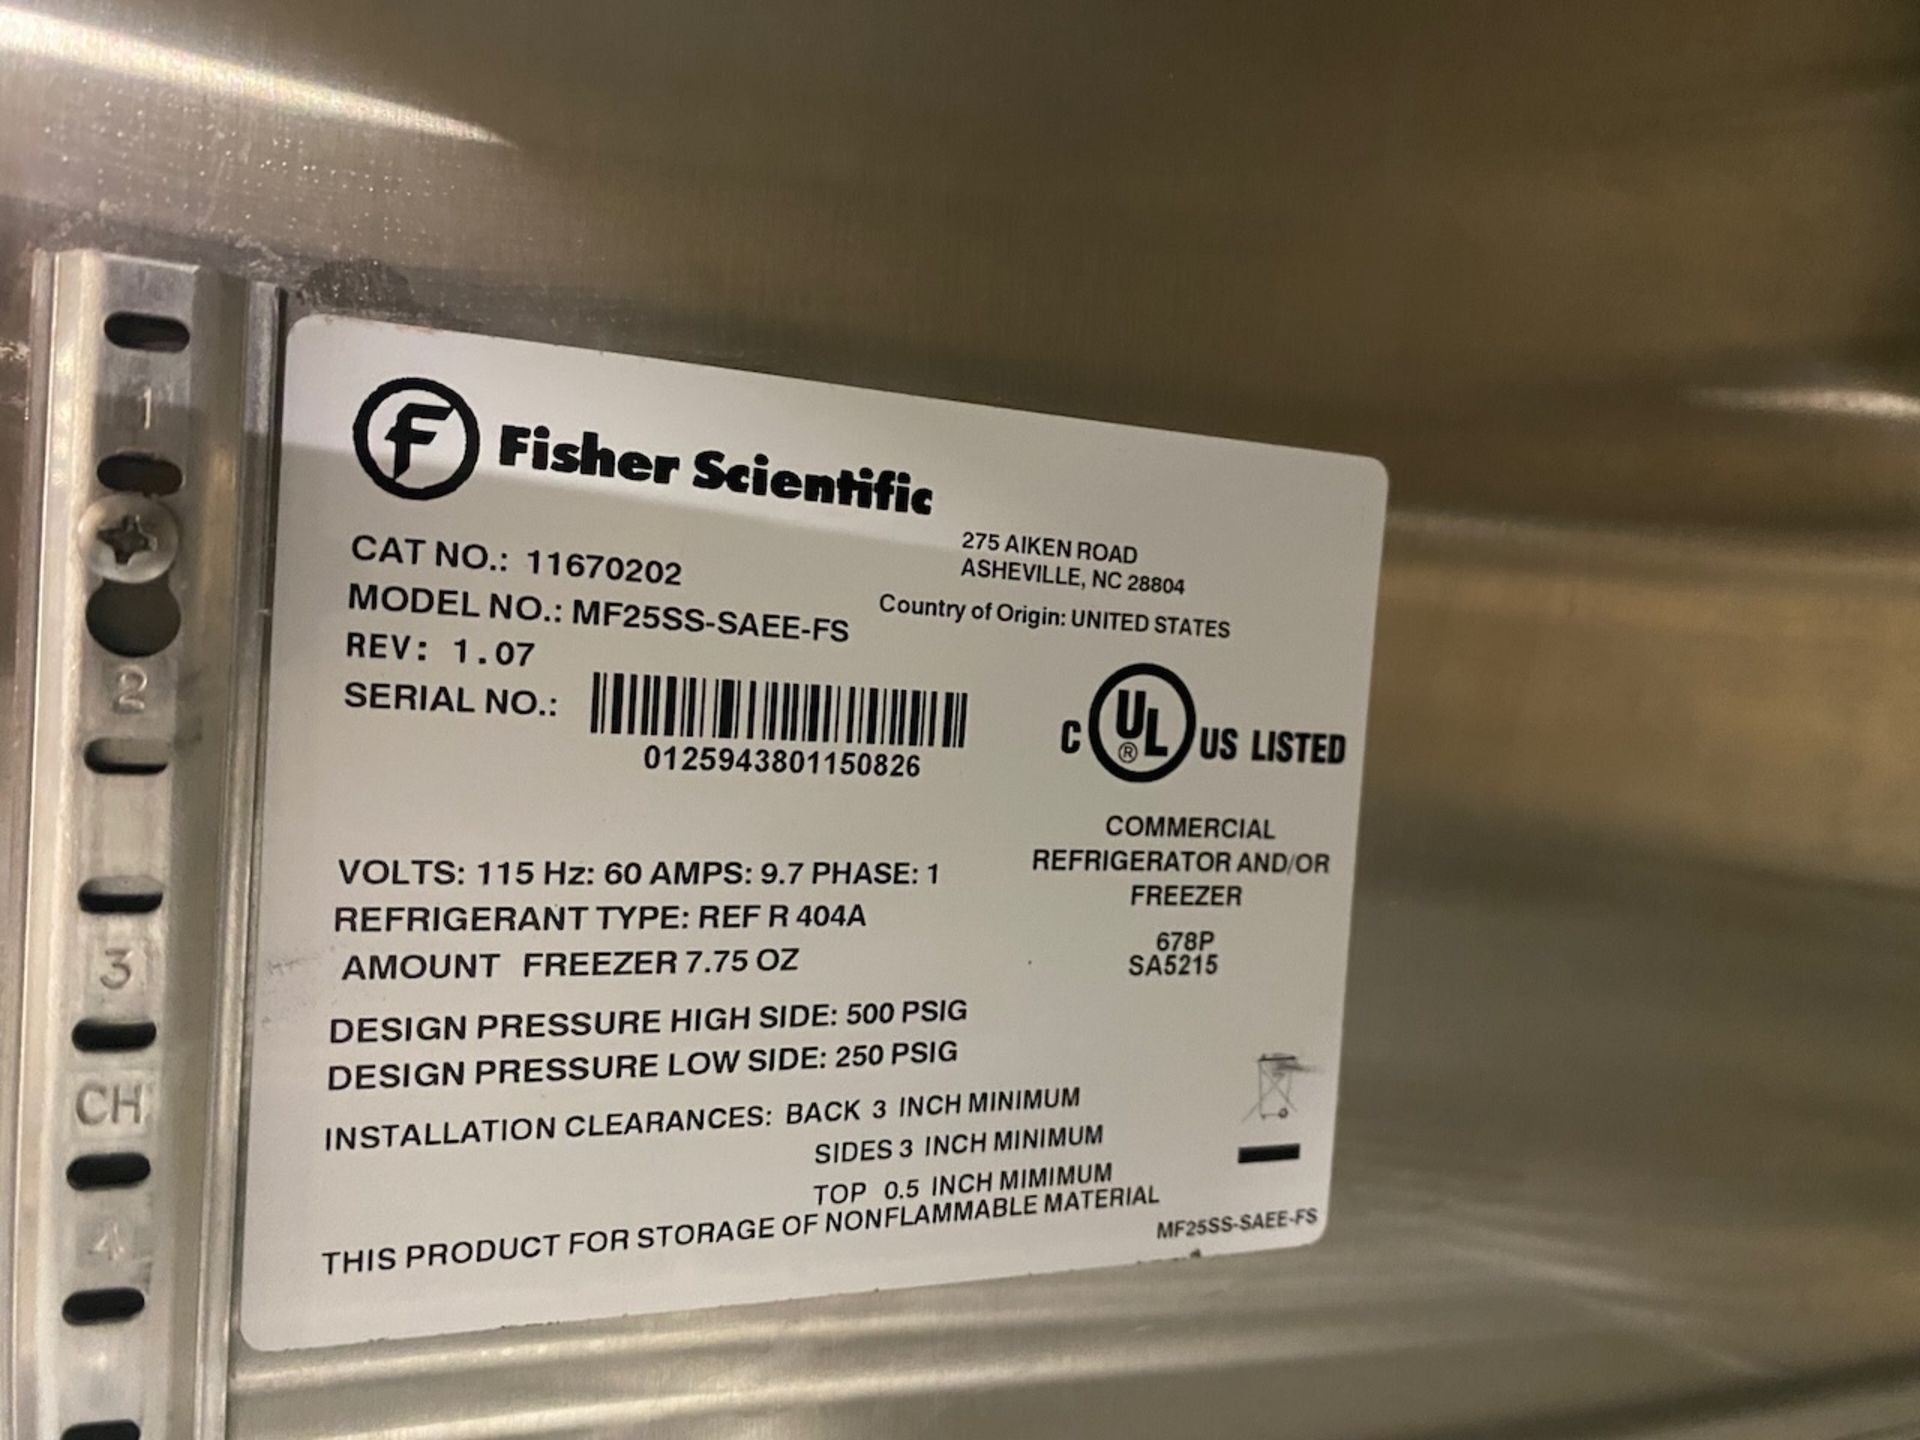 Fisher scientific stainless steel isotemp freezer - Image 4 of 4